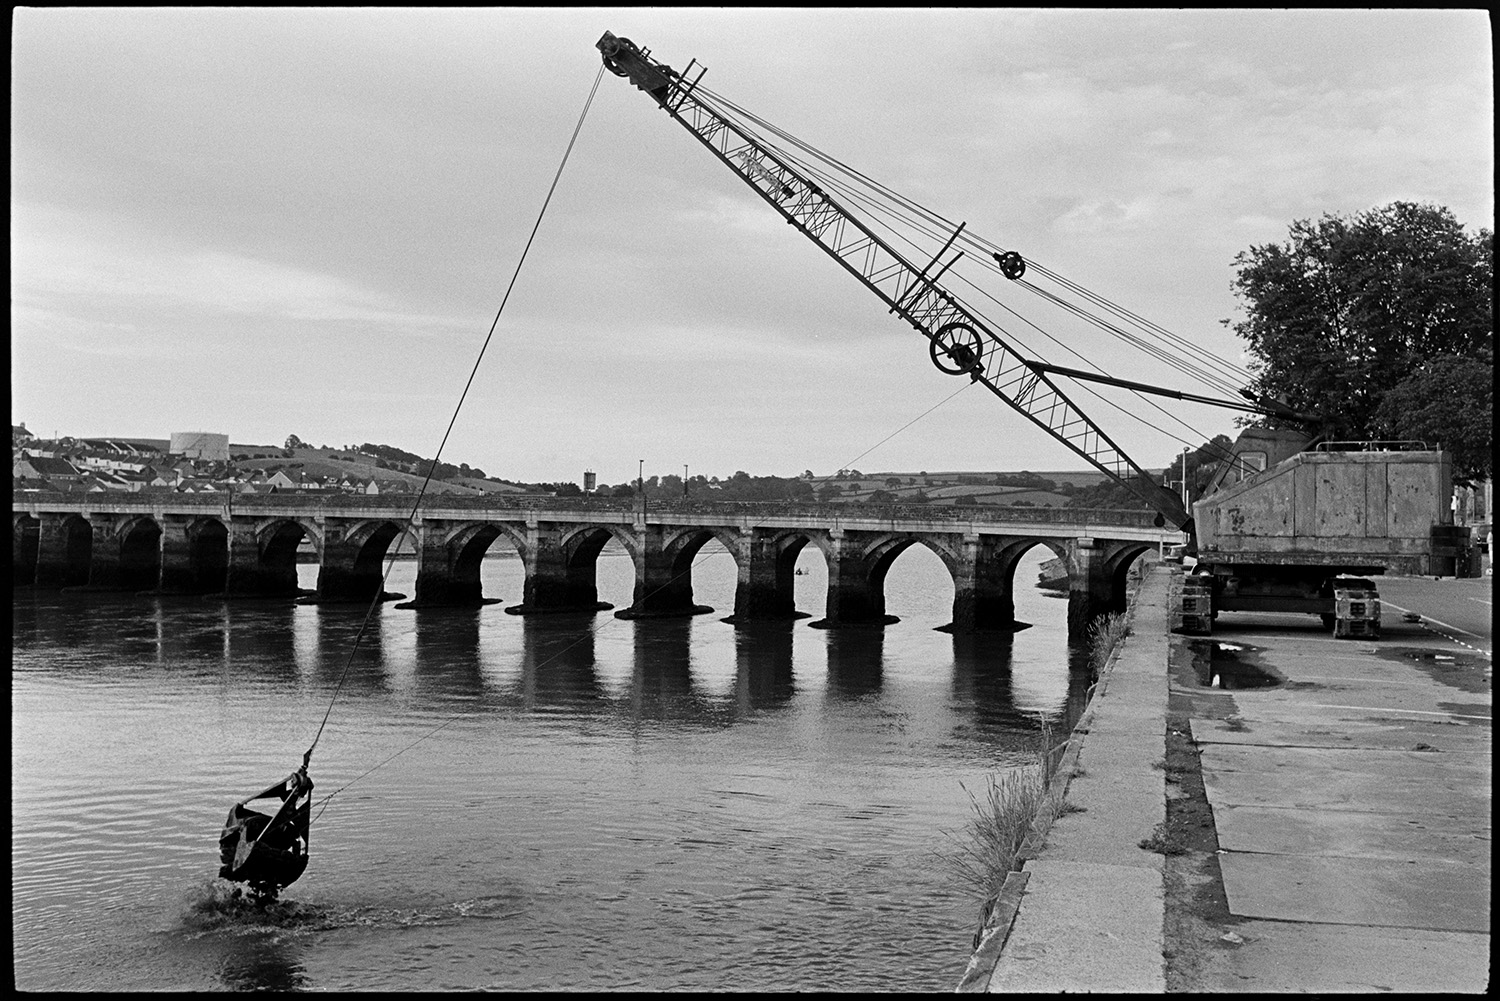 Crane and grab dredger working off quay, old bridge behind. 
[A crane and mechanical grab dredging off Bideford Quay. Bideford Long Bridge, also known as Bideford Old Bridge, can be seen in the background.]